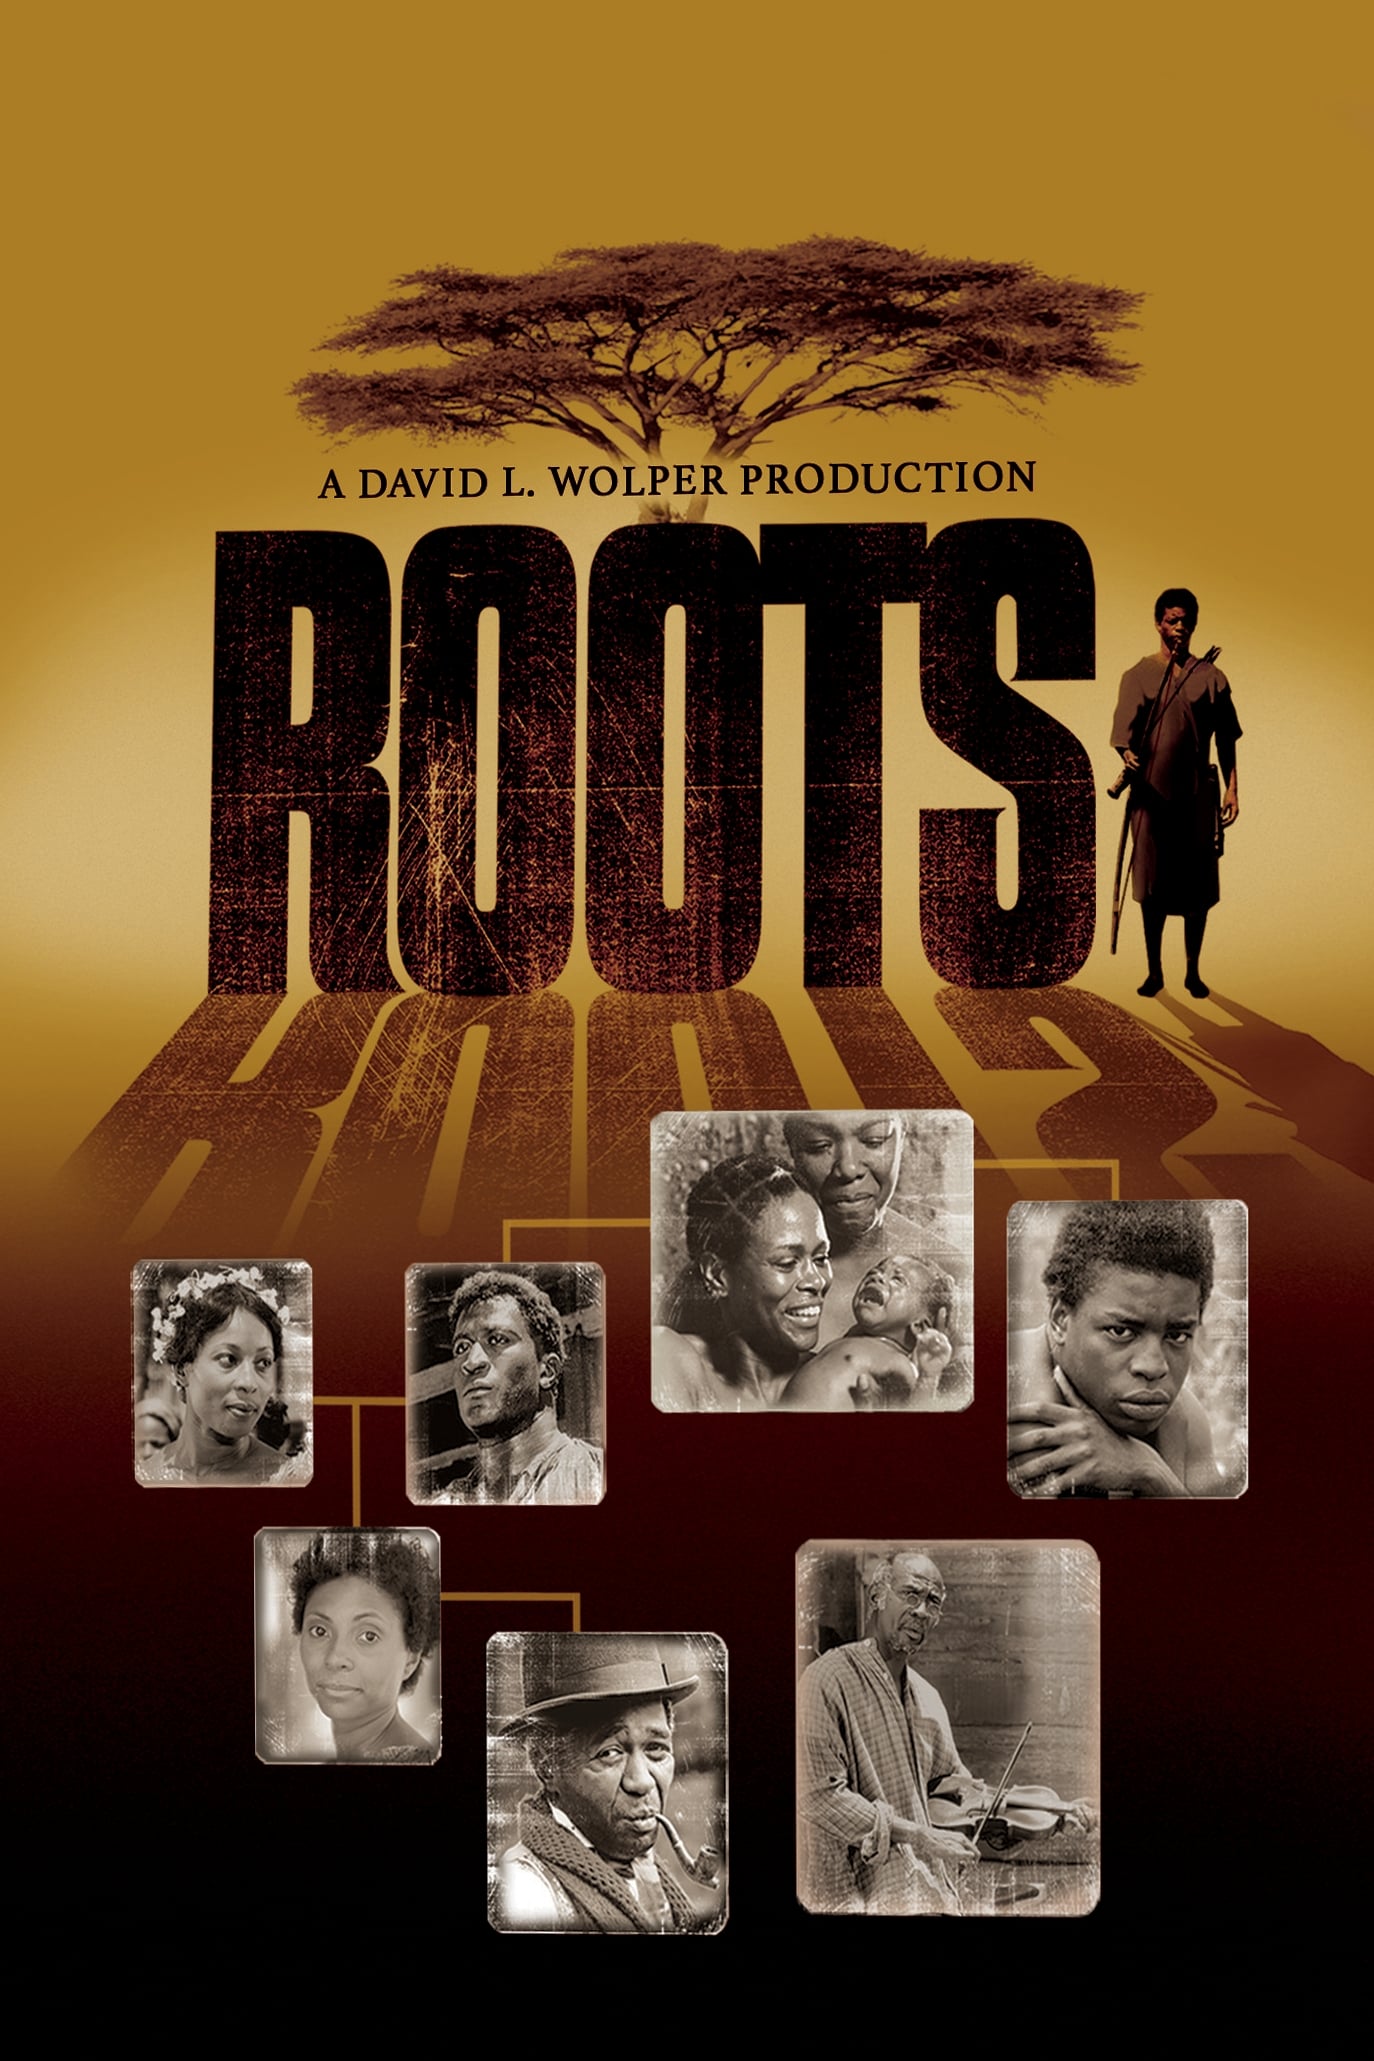 Roots TV Shows About Slavery